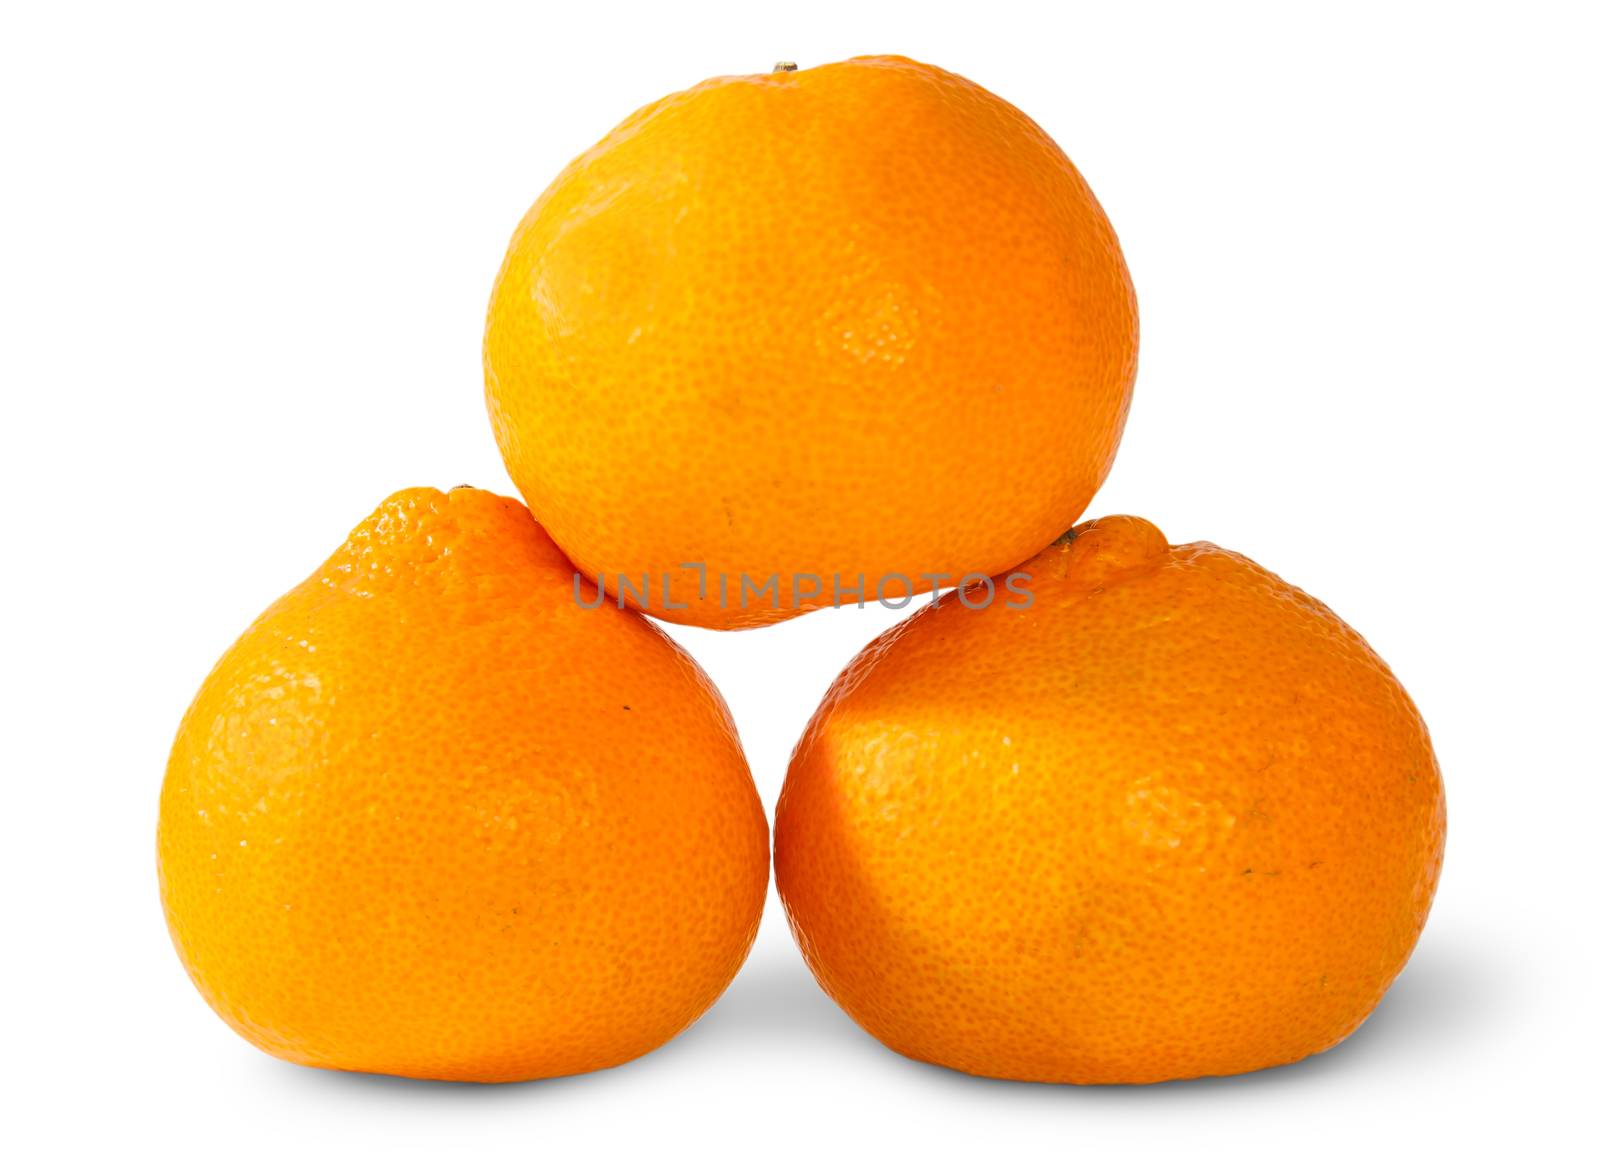 Pyramid Of Three Ripe Tangerines Isolated On White Background 